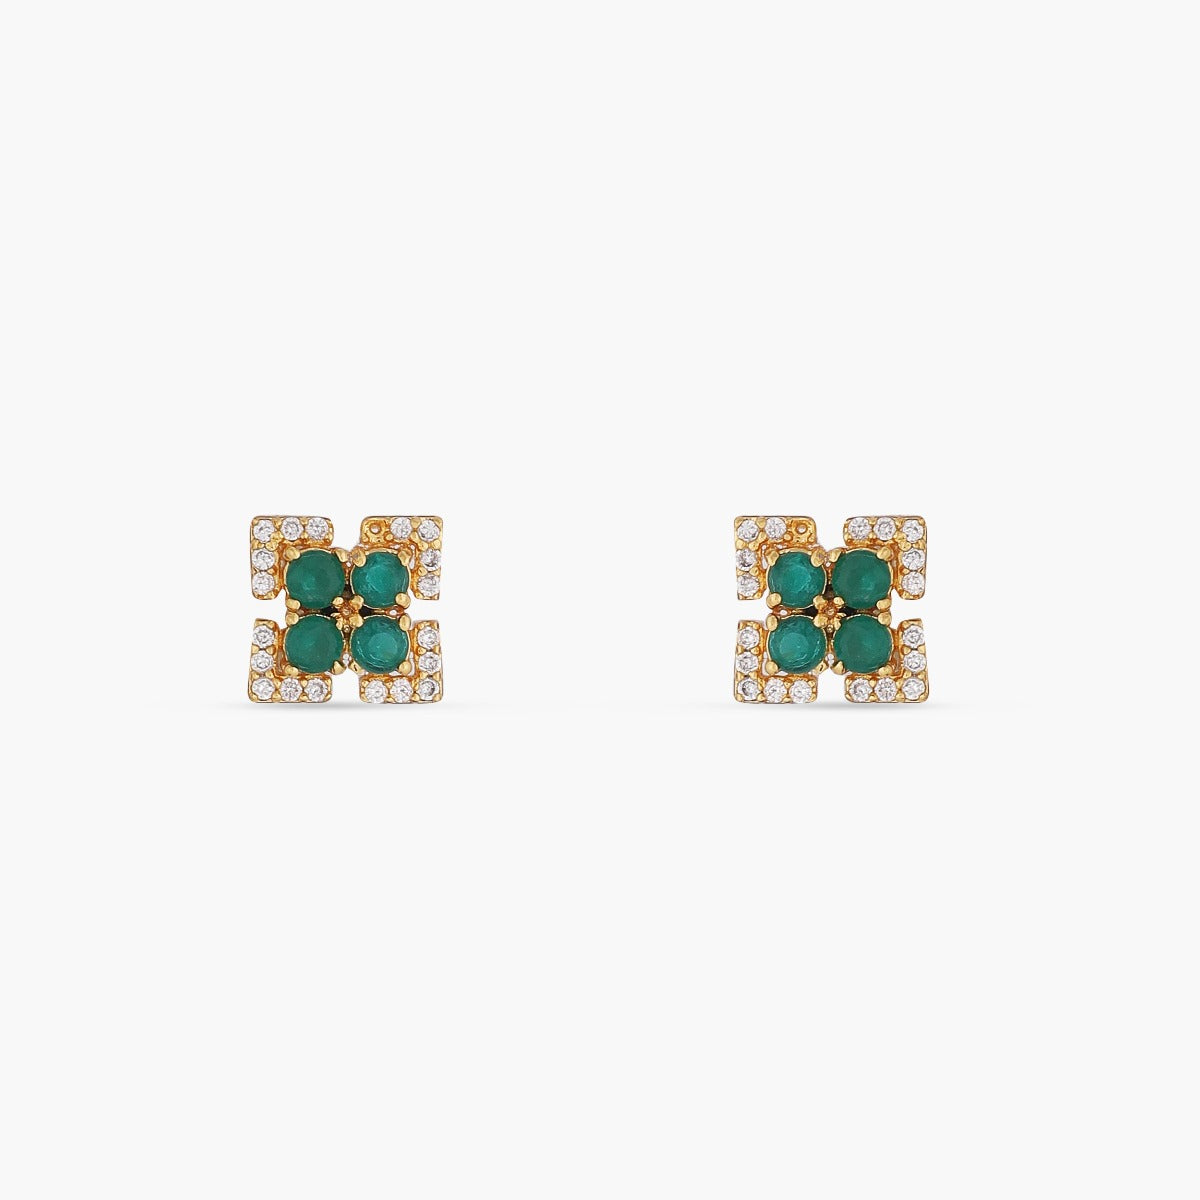 Square Delicate CZ Earring Studs